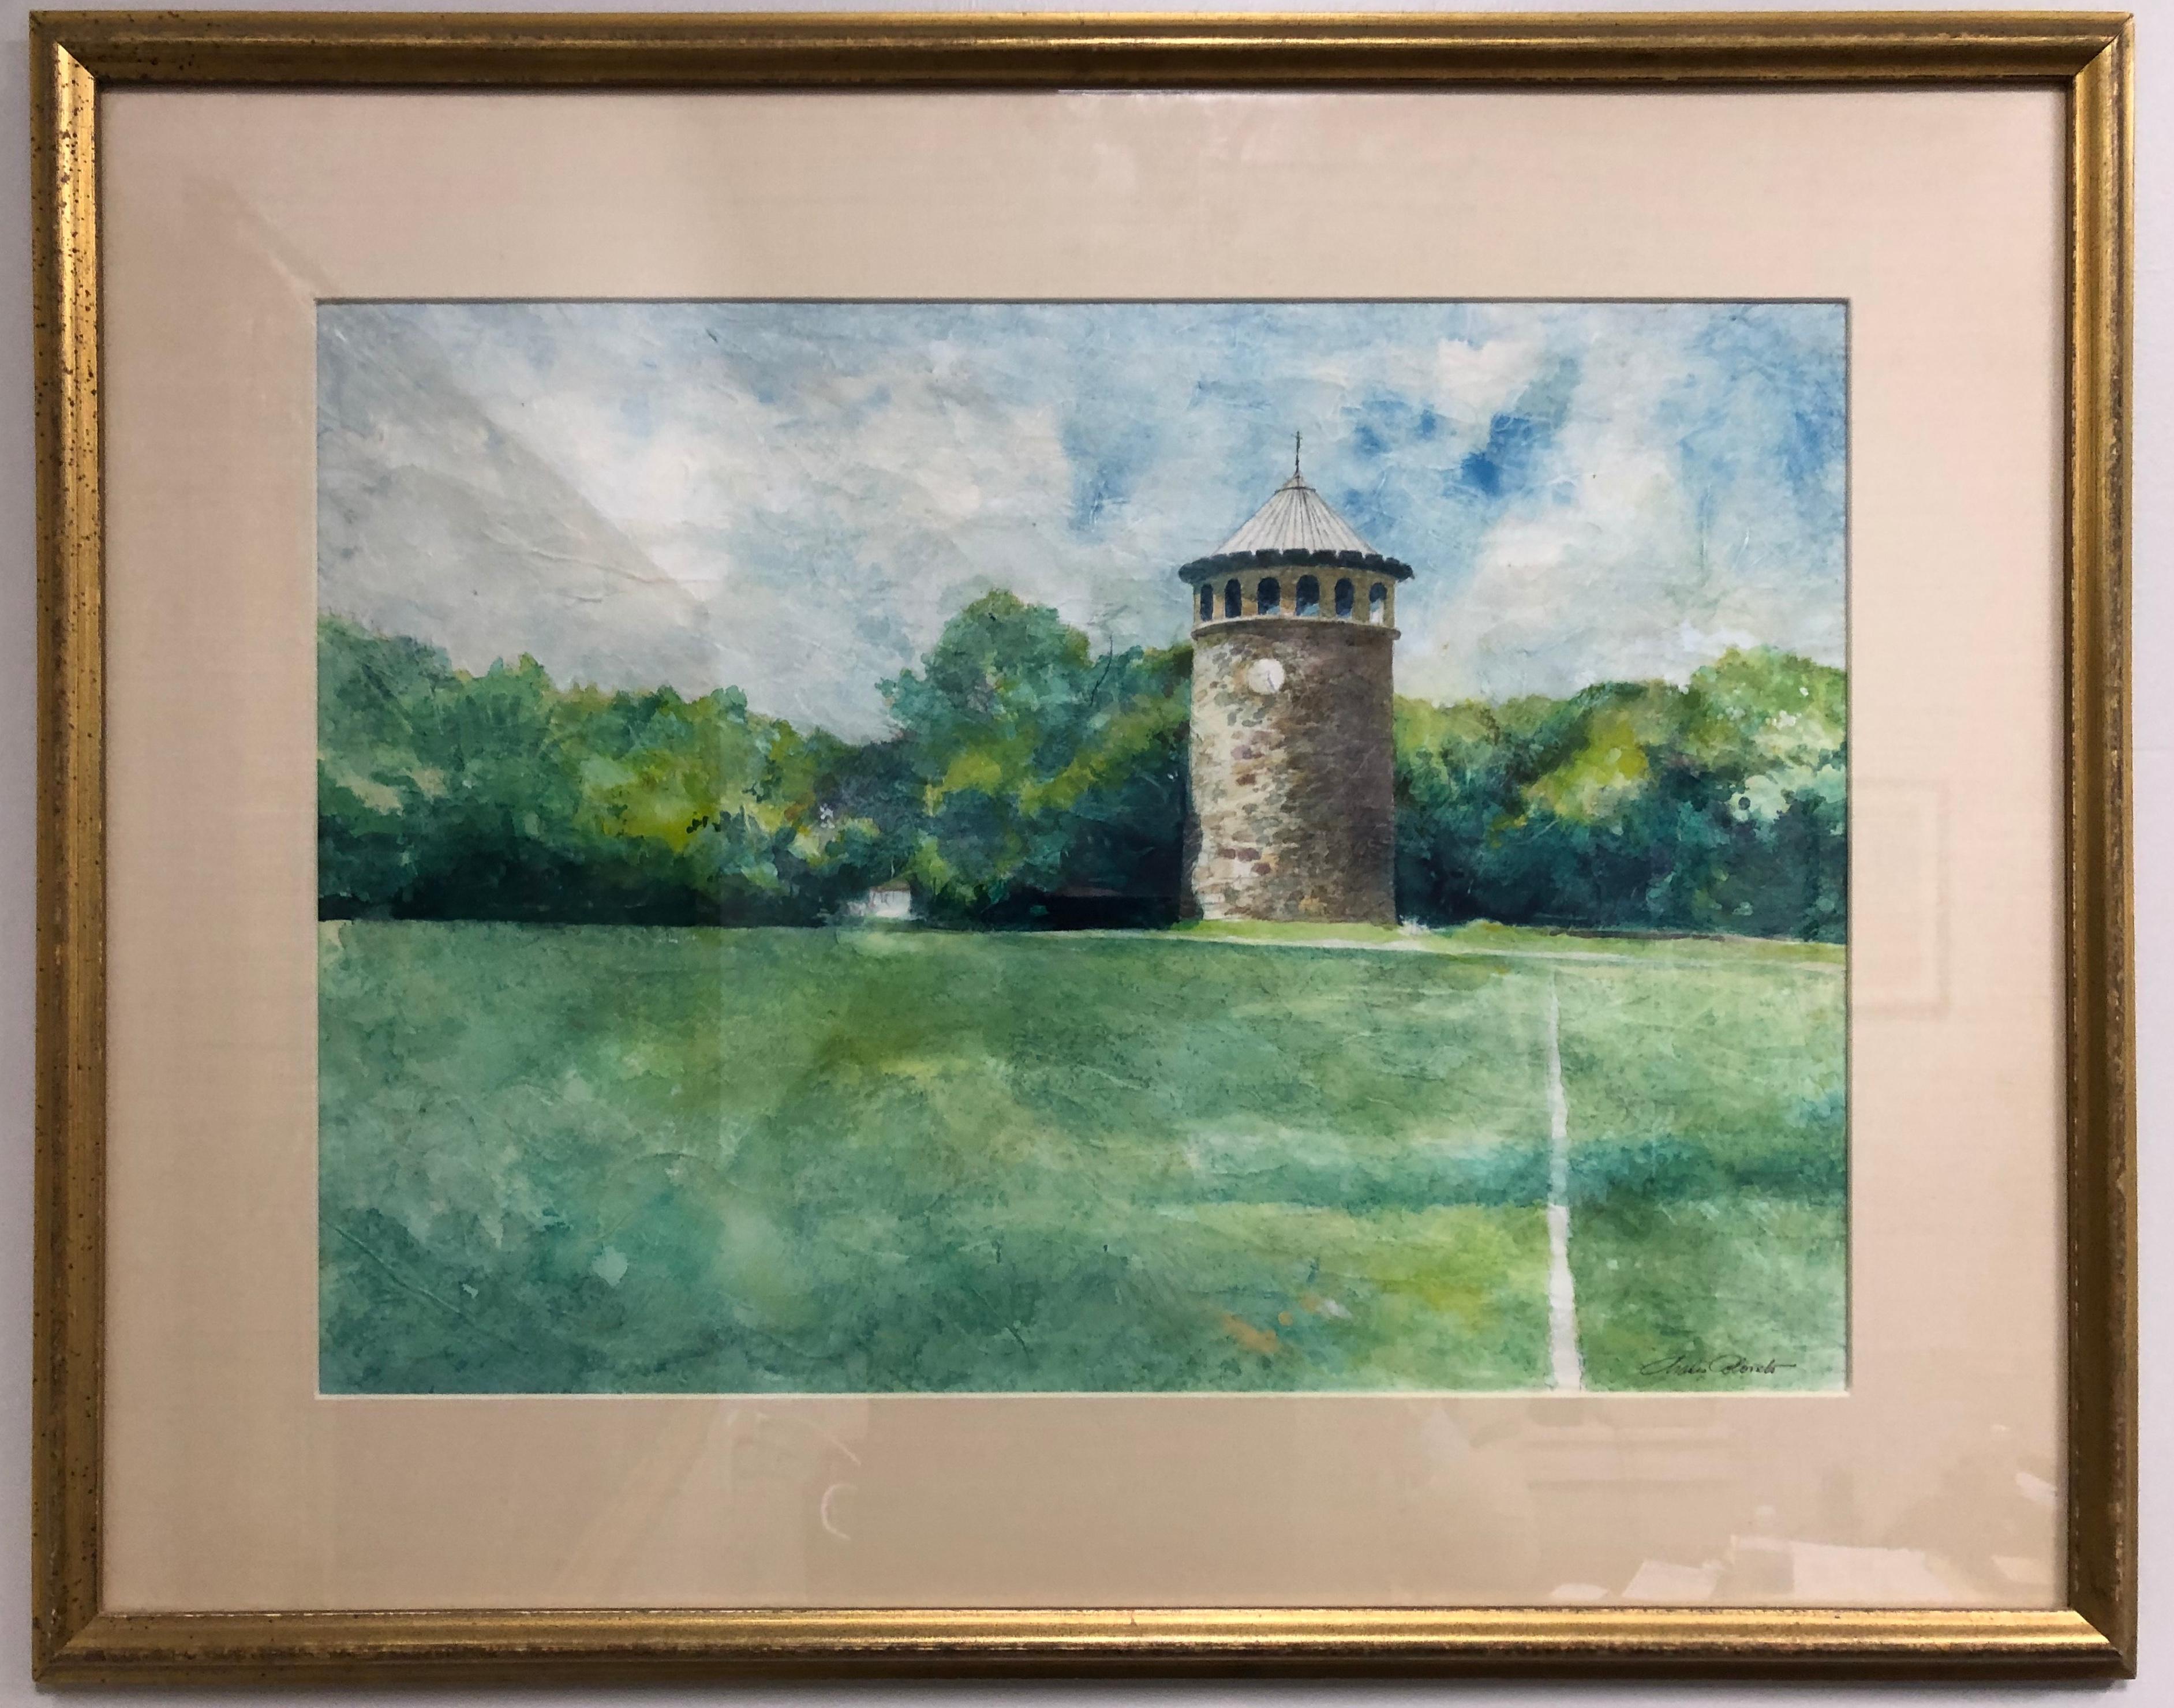 Rockford Park - Painting by Charles Colombo